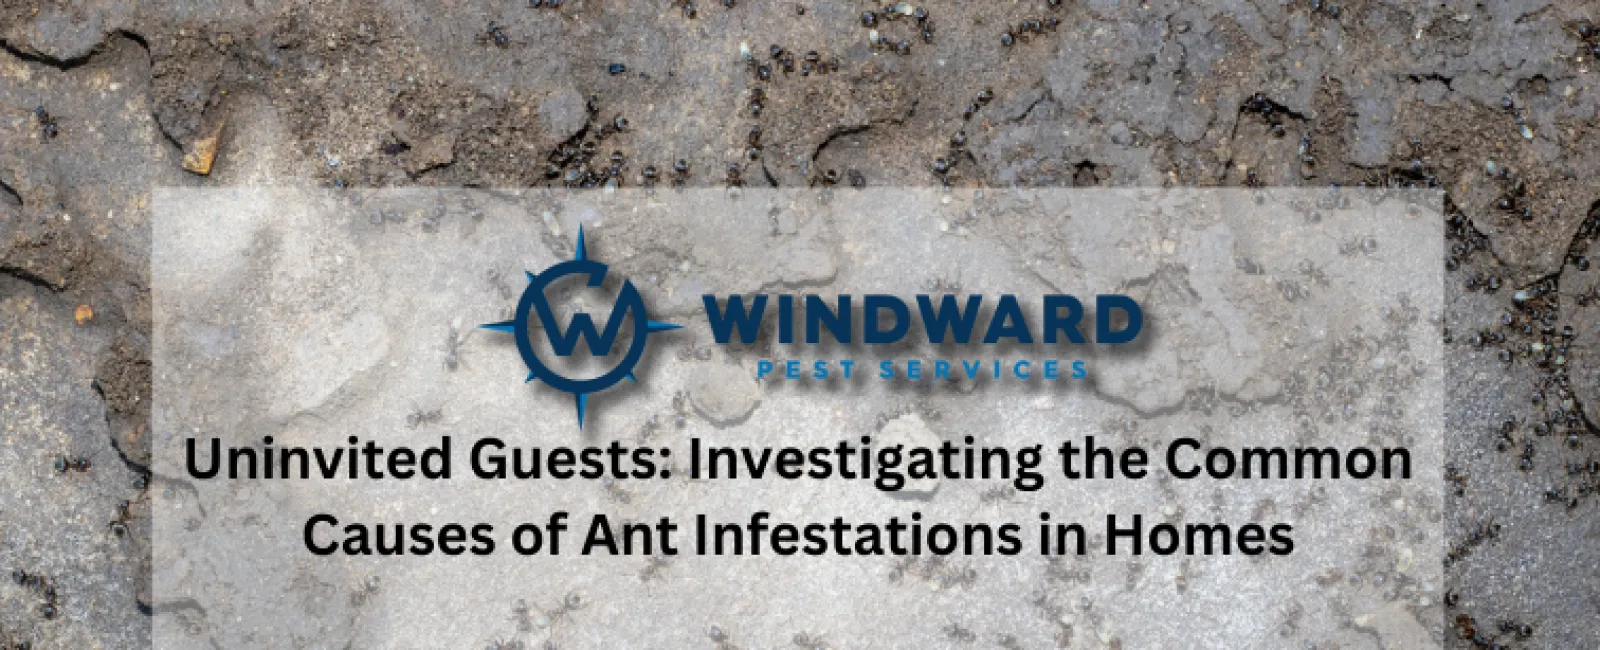 Uninvited Guests: Investigating the Common Causes of Ant Infestations in Homes